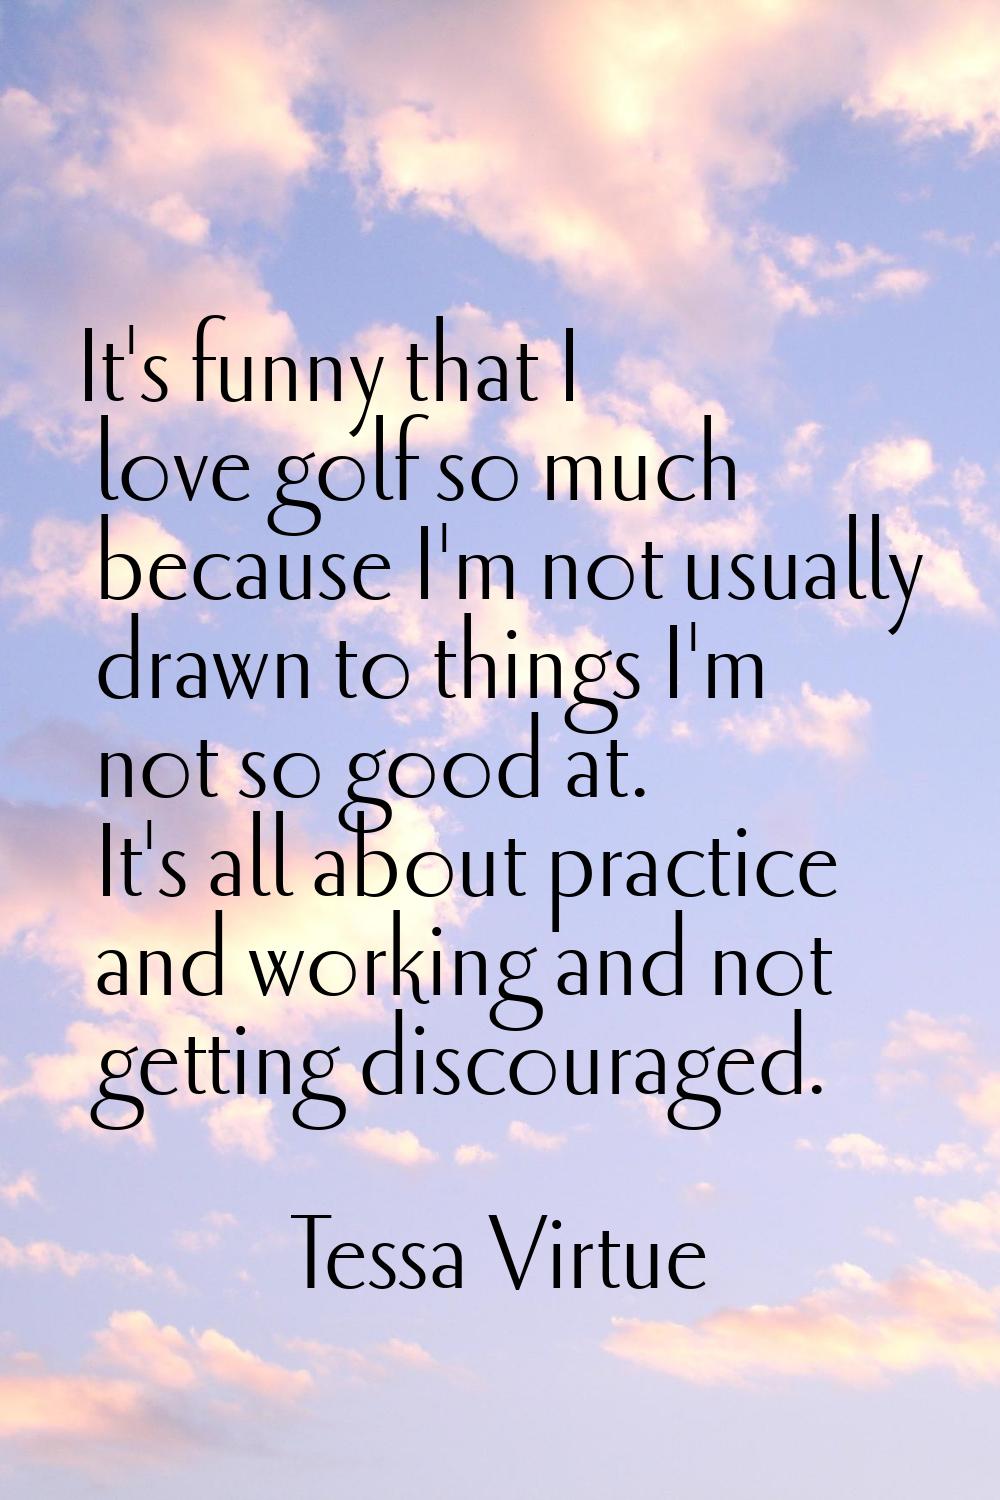 It's funny that I love golf so much because I'm not usually drawn to things I'm not so good at. It'